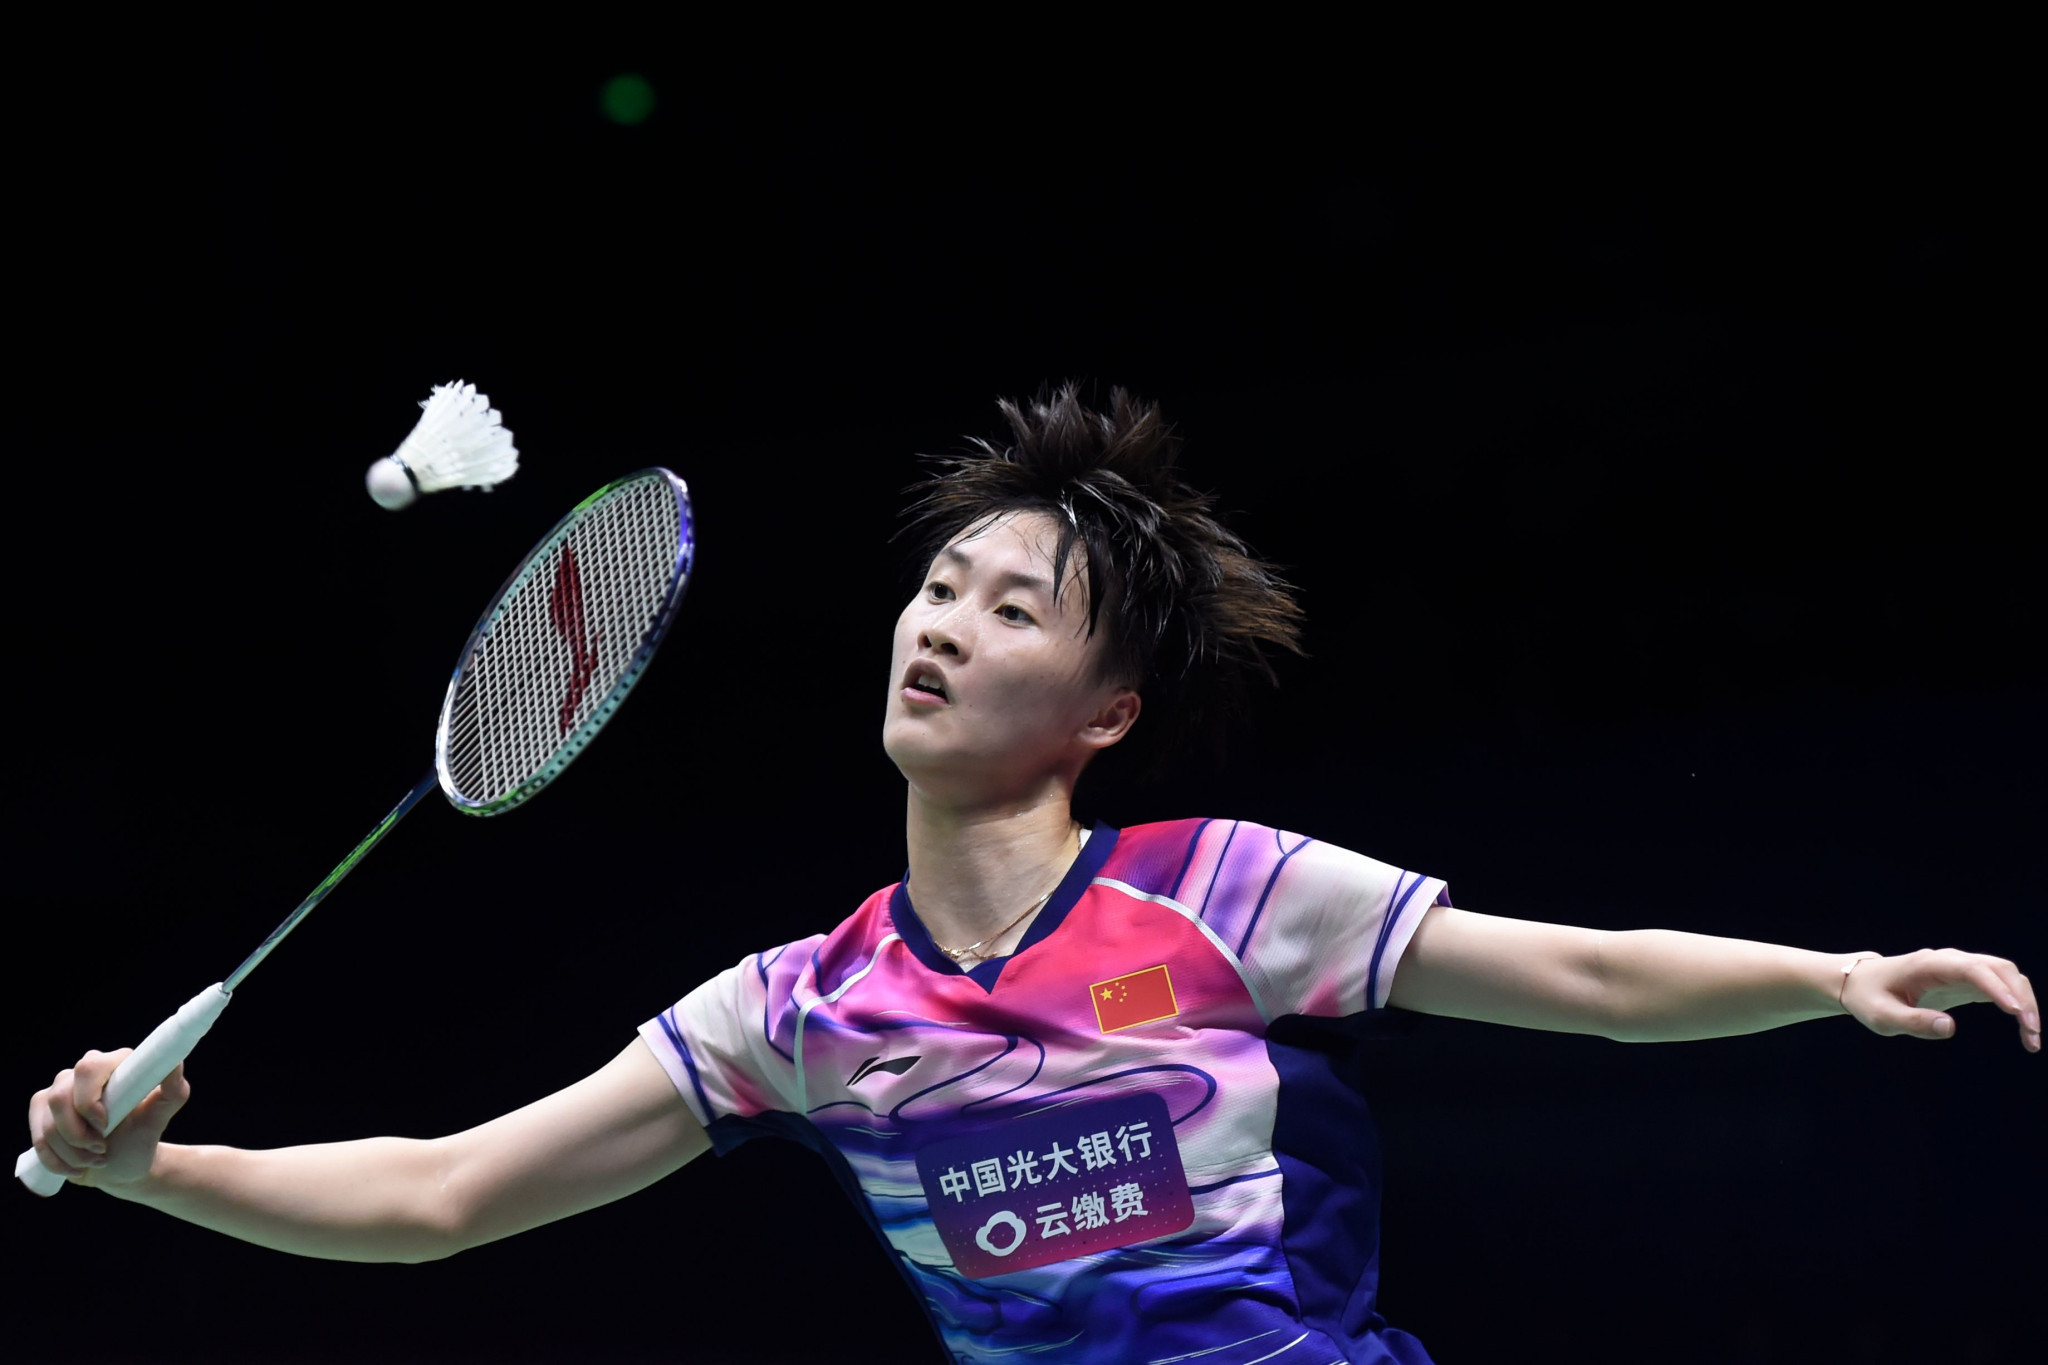 Chen Yufei advanced in the women's draw with a straight games victory ©Getty Images